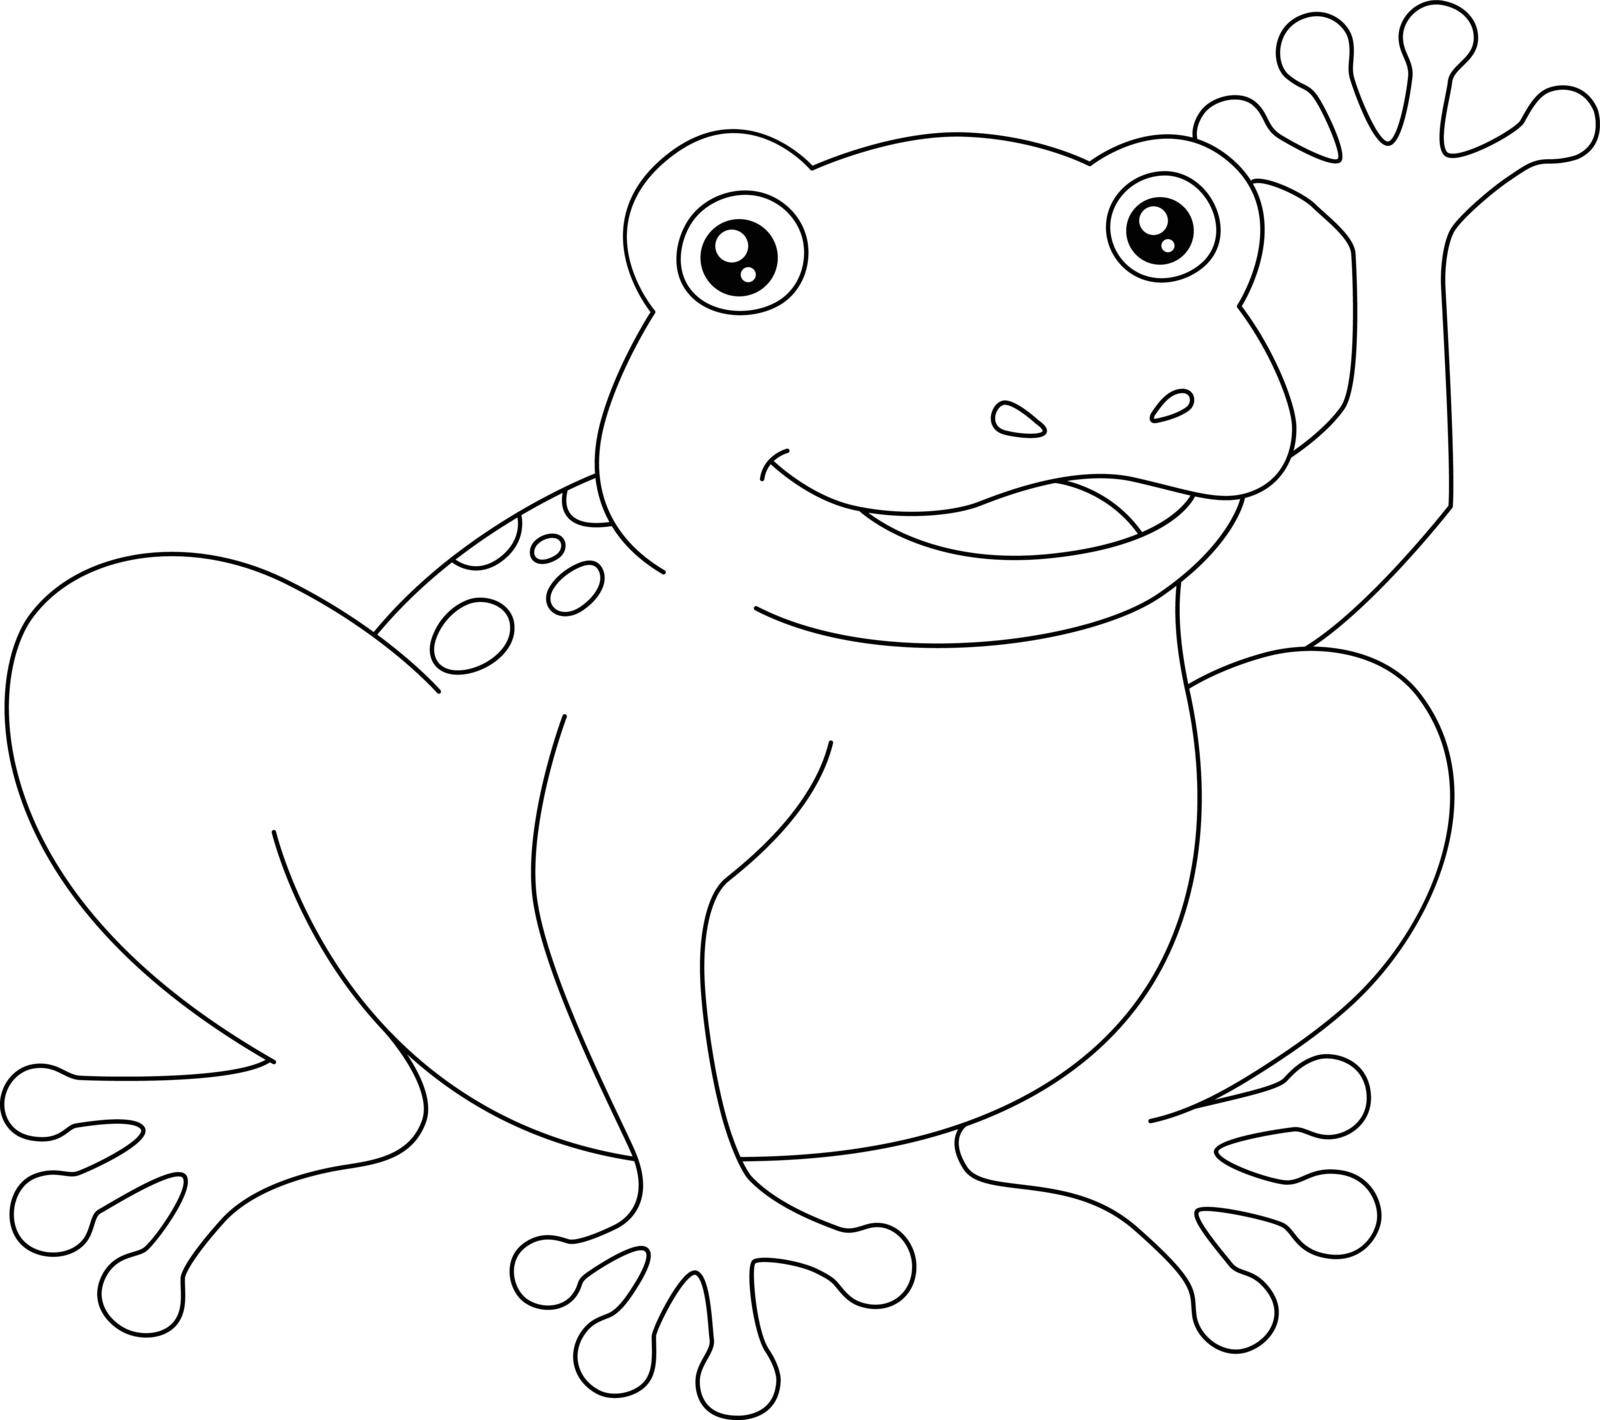 Frog Coloring Page Isolated for Kids by abbydesign